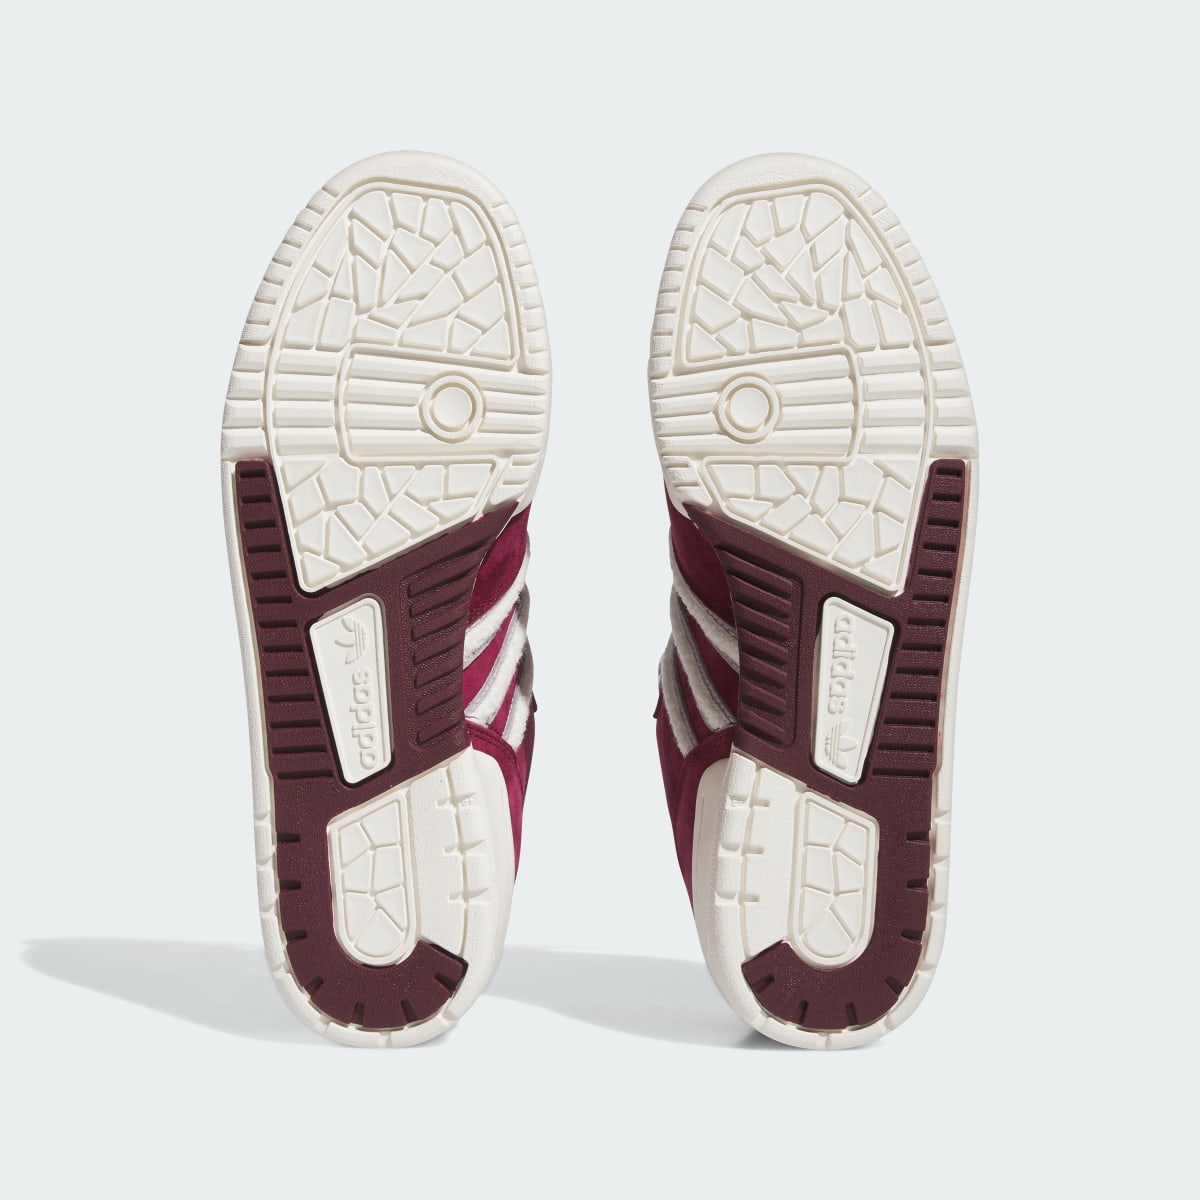 Adidas Texas A&M Rivalry Low Shoes. 4